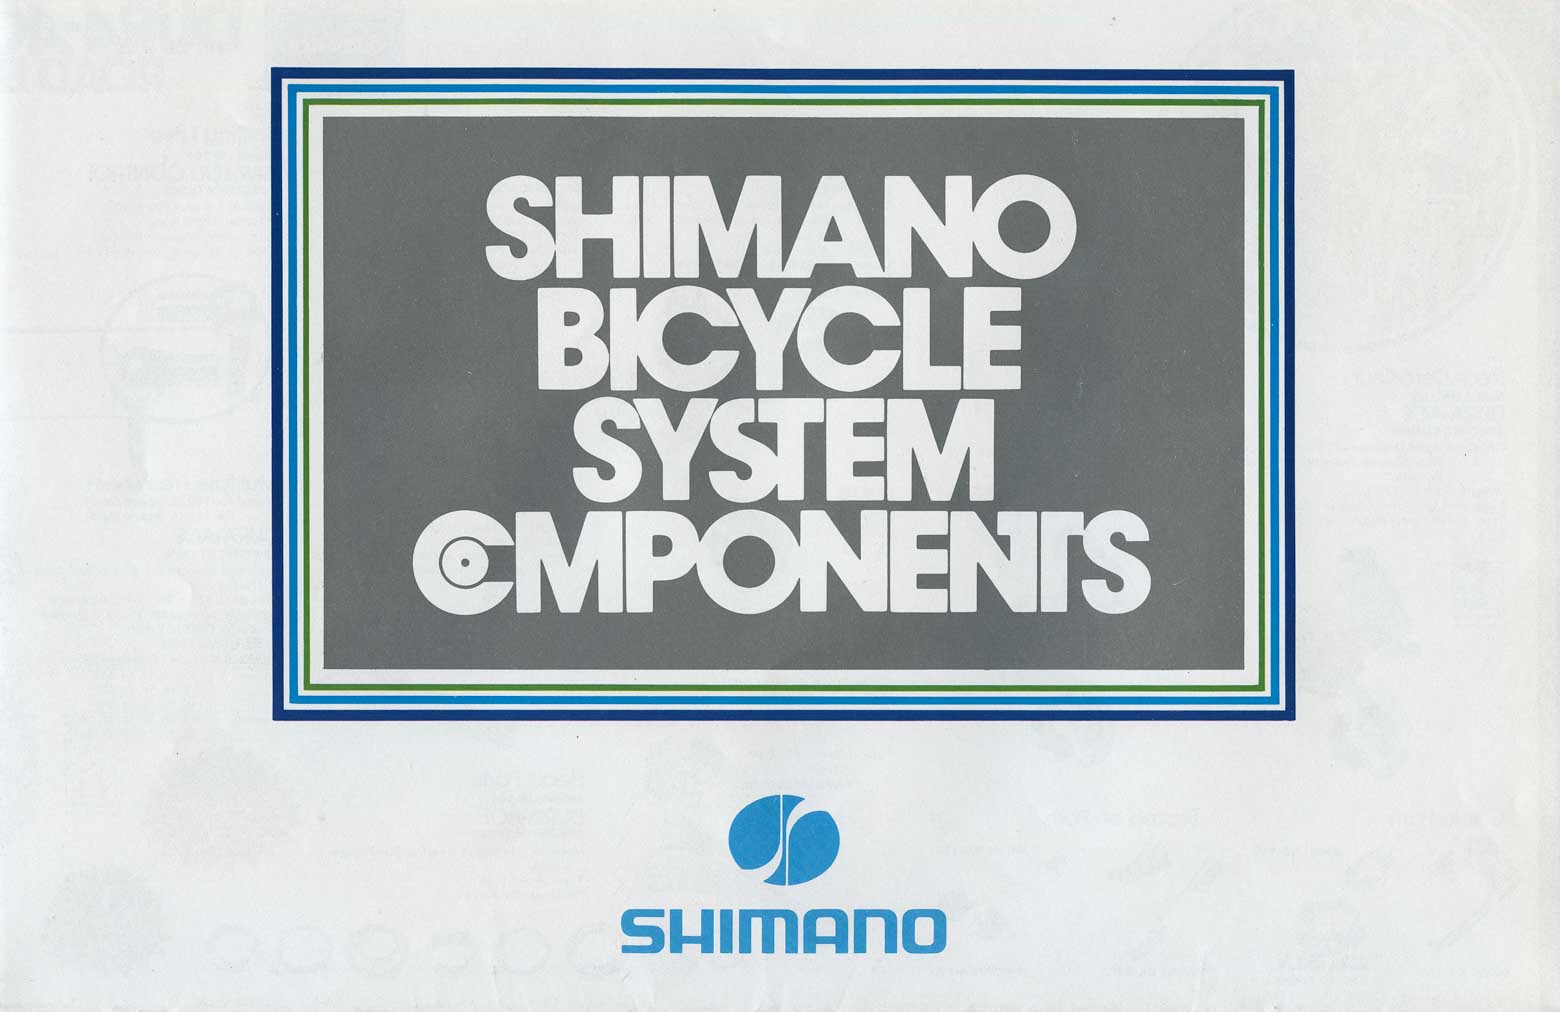 Shimano Bicycle System Components (1977) scan 01 main image